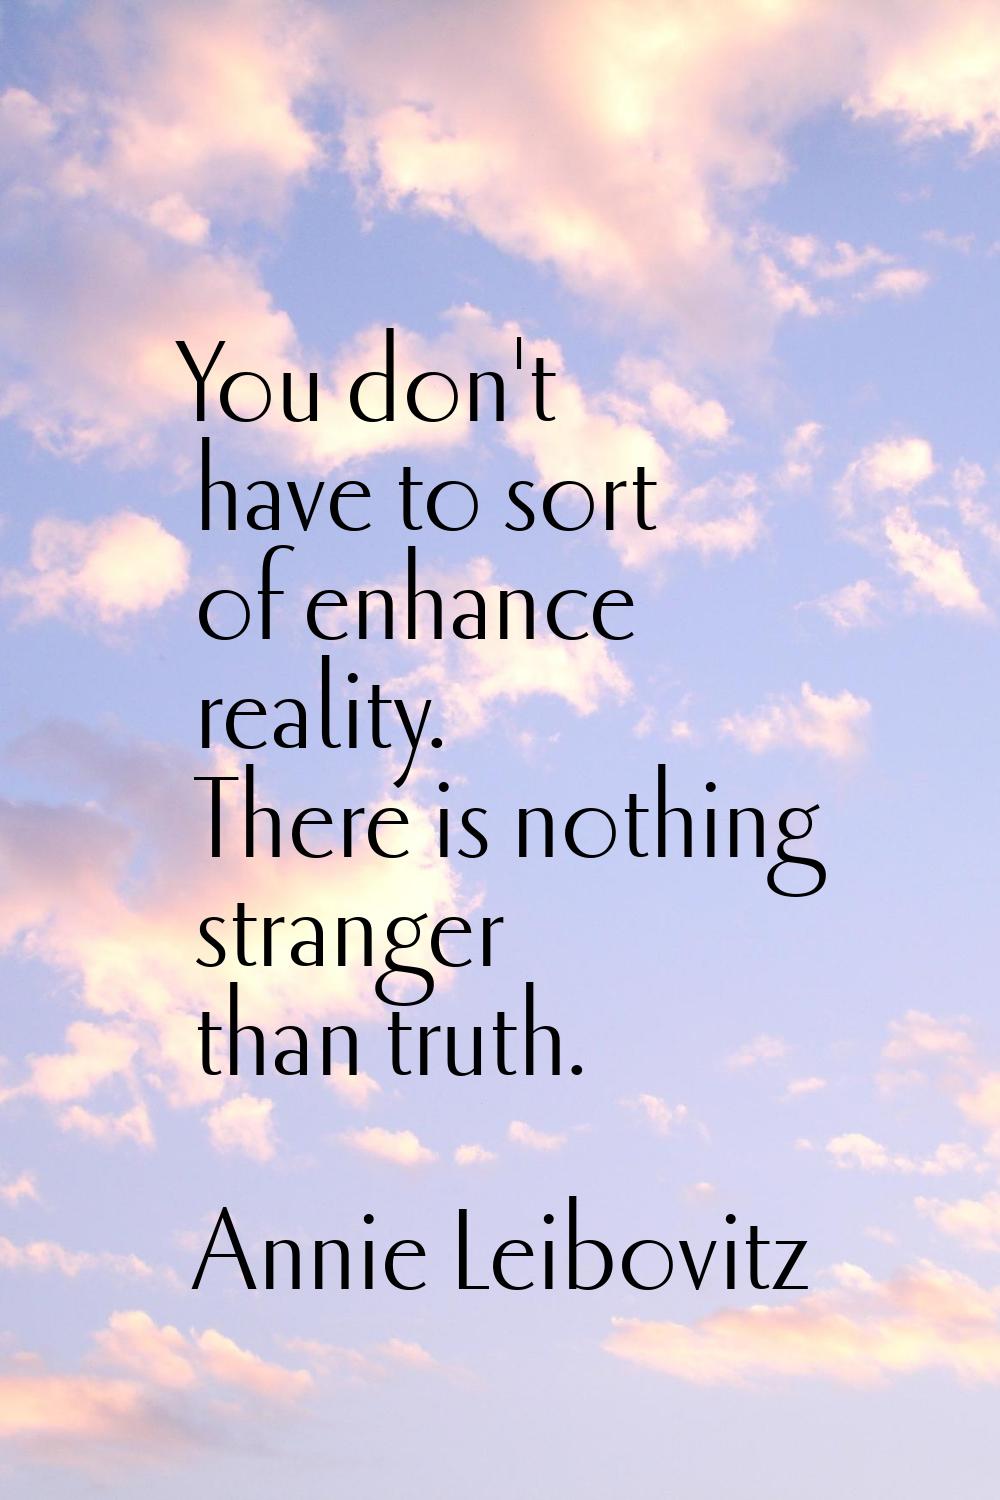 You don't have to sort of enhance reality. There is nothing stranger than truth.